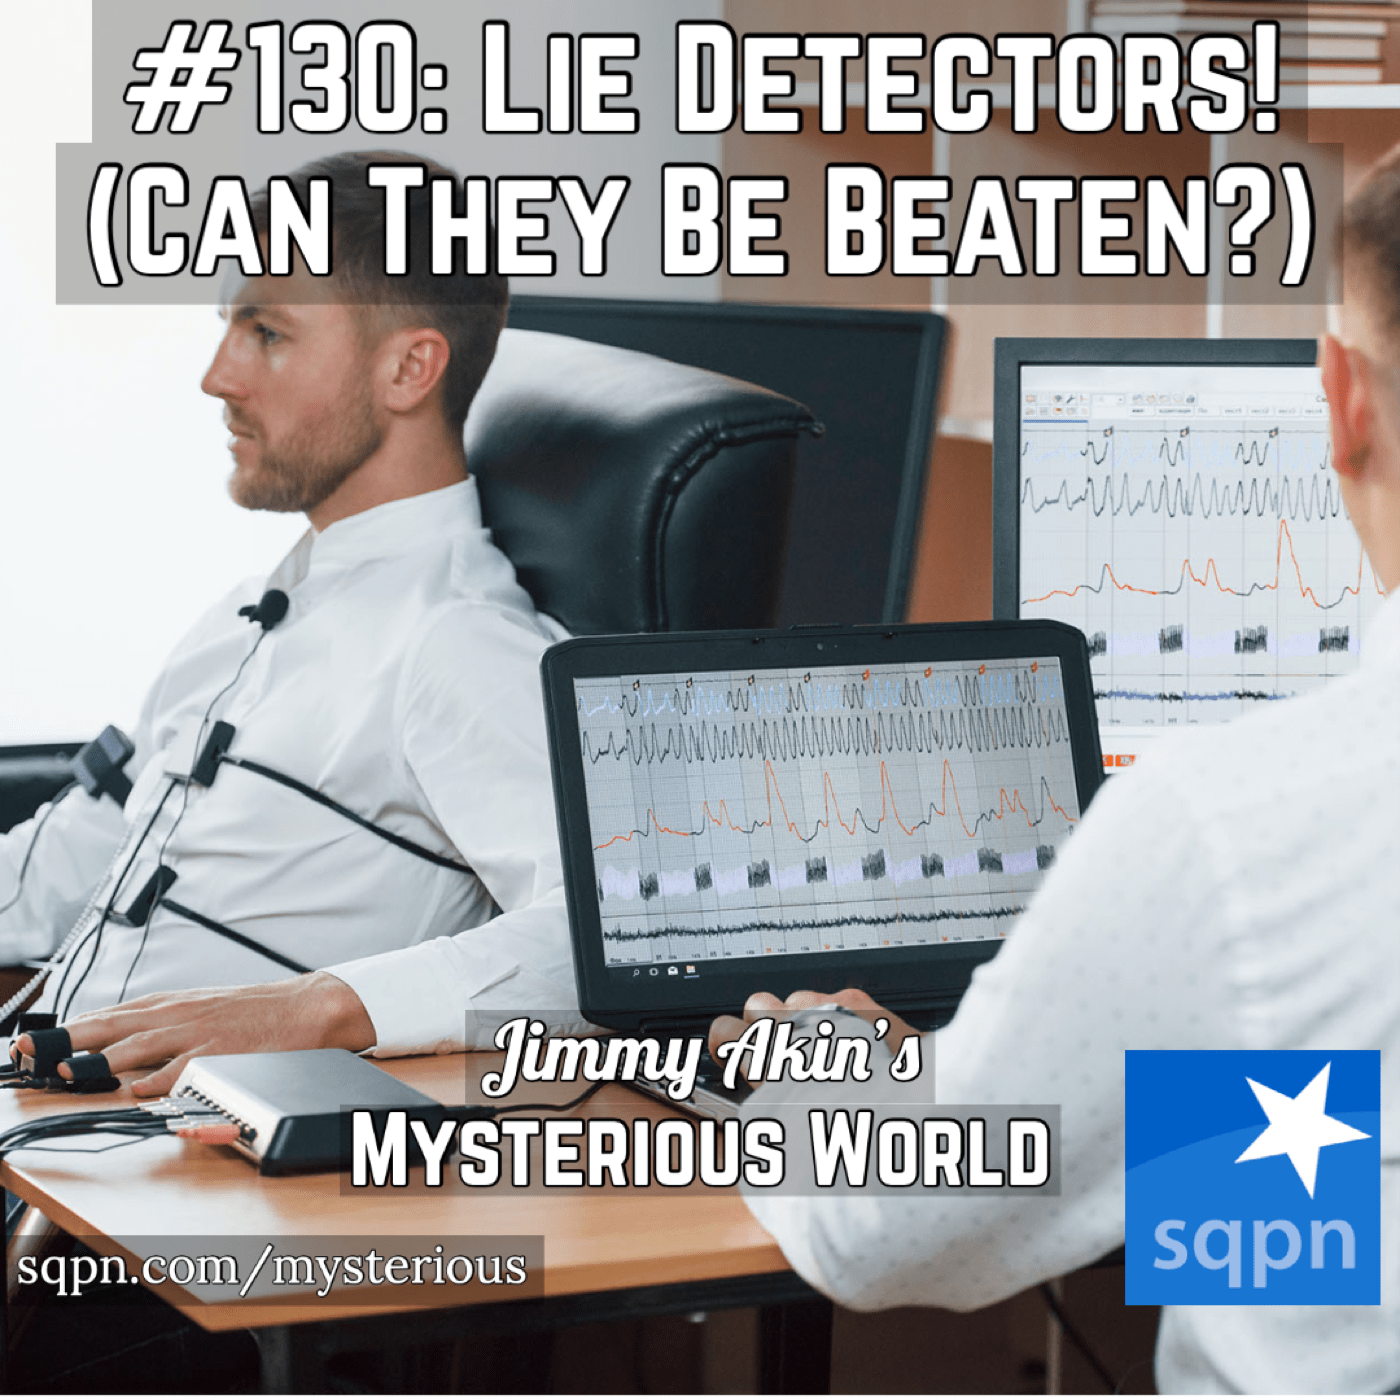 Lie Detectors! (How Do They Work, How Accurate Are They, and Can They Be Beaten?)